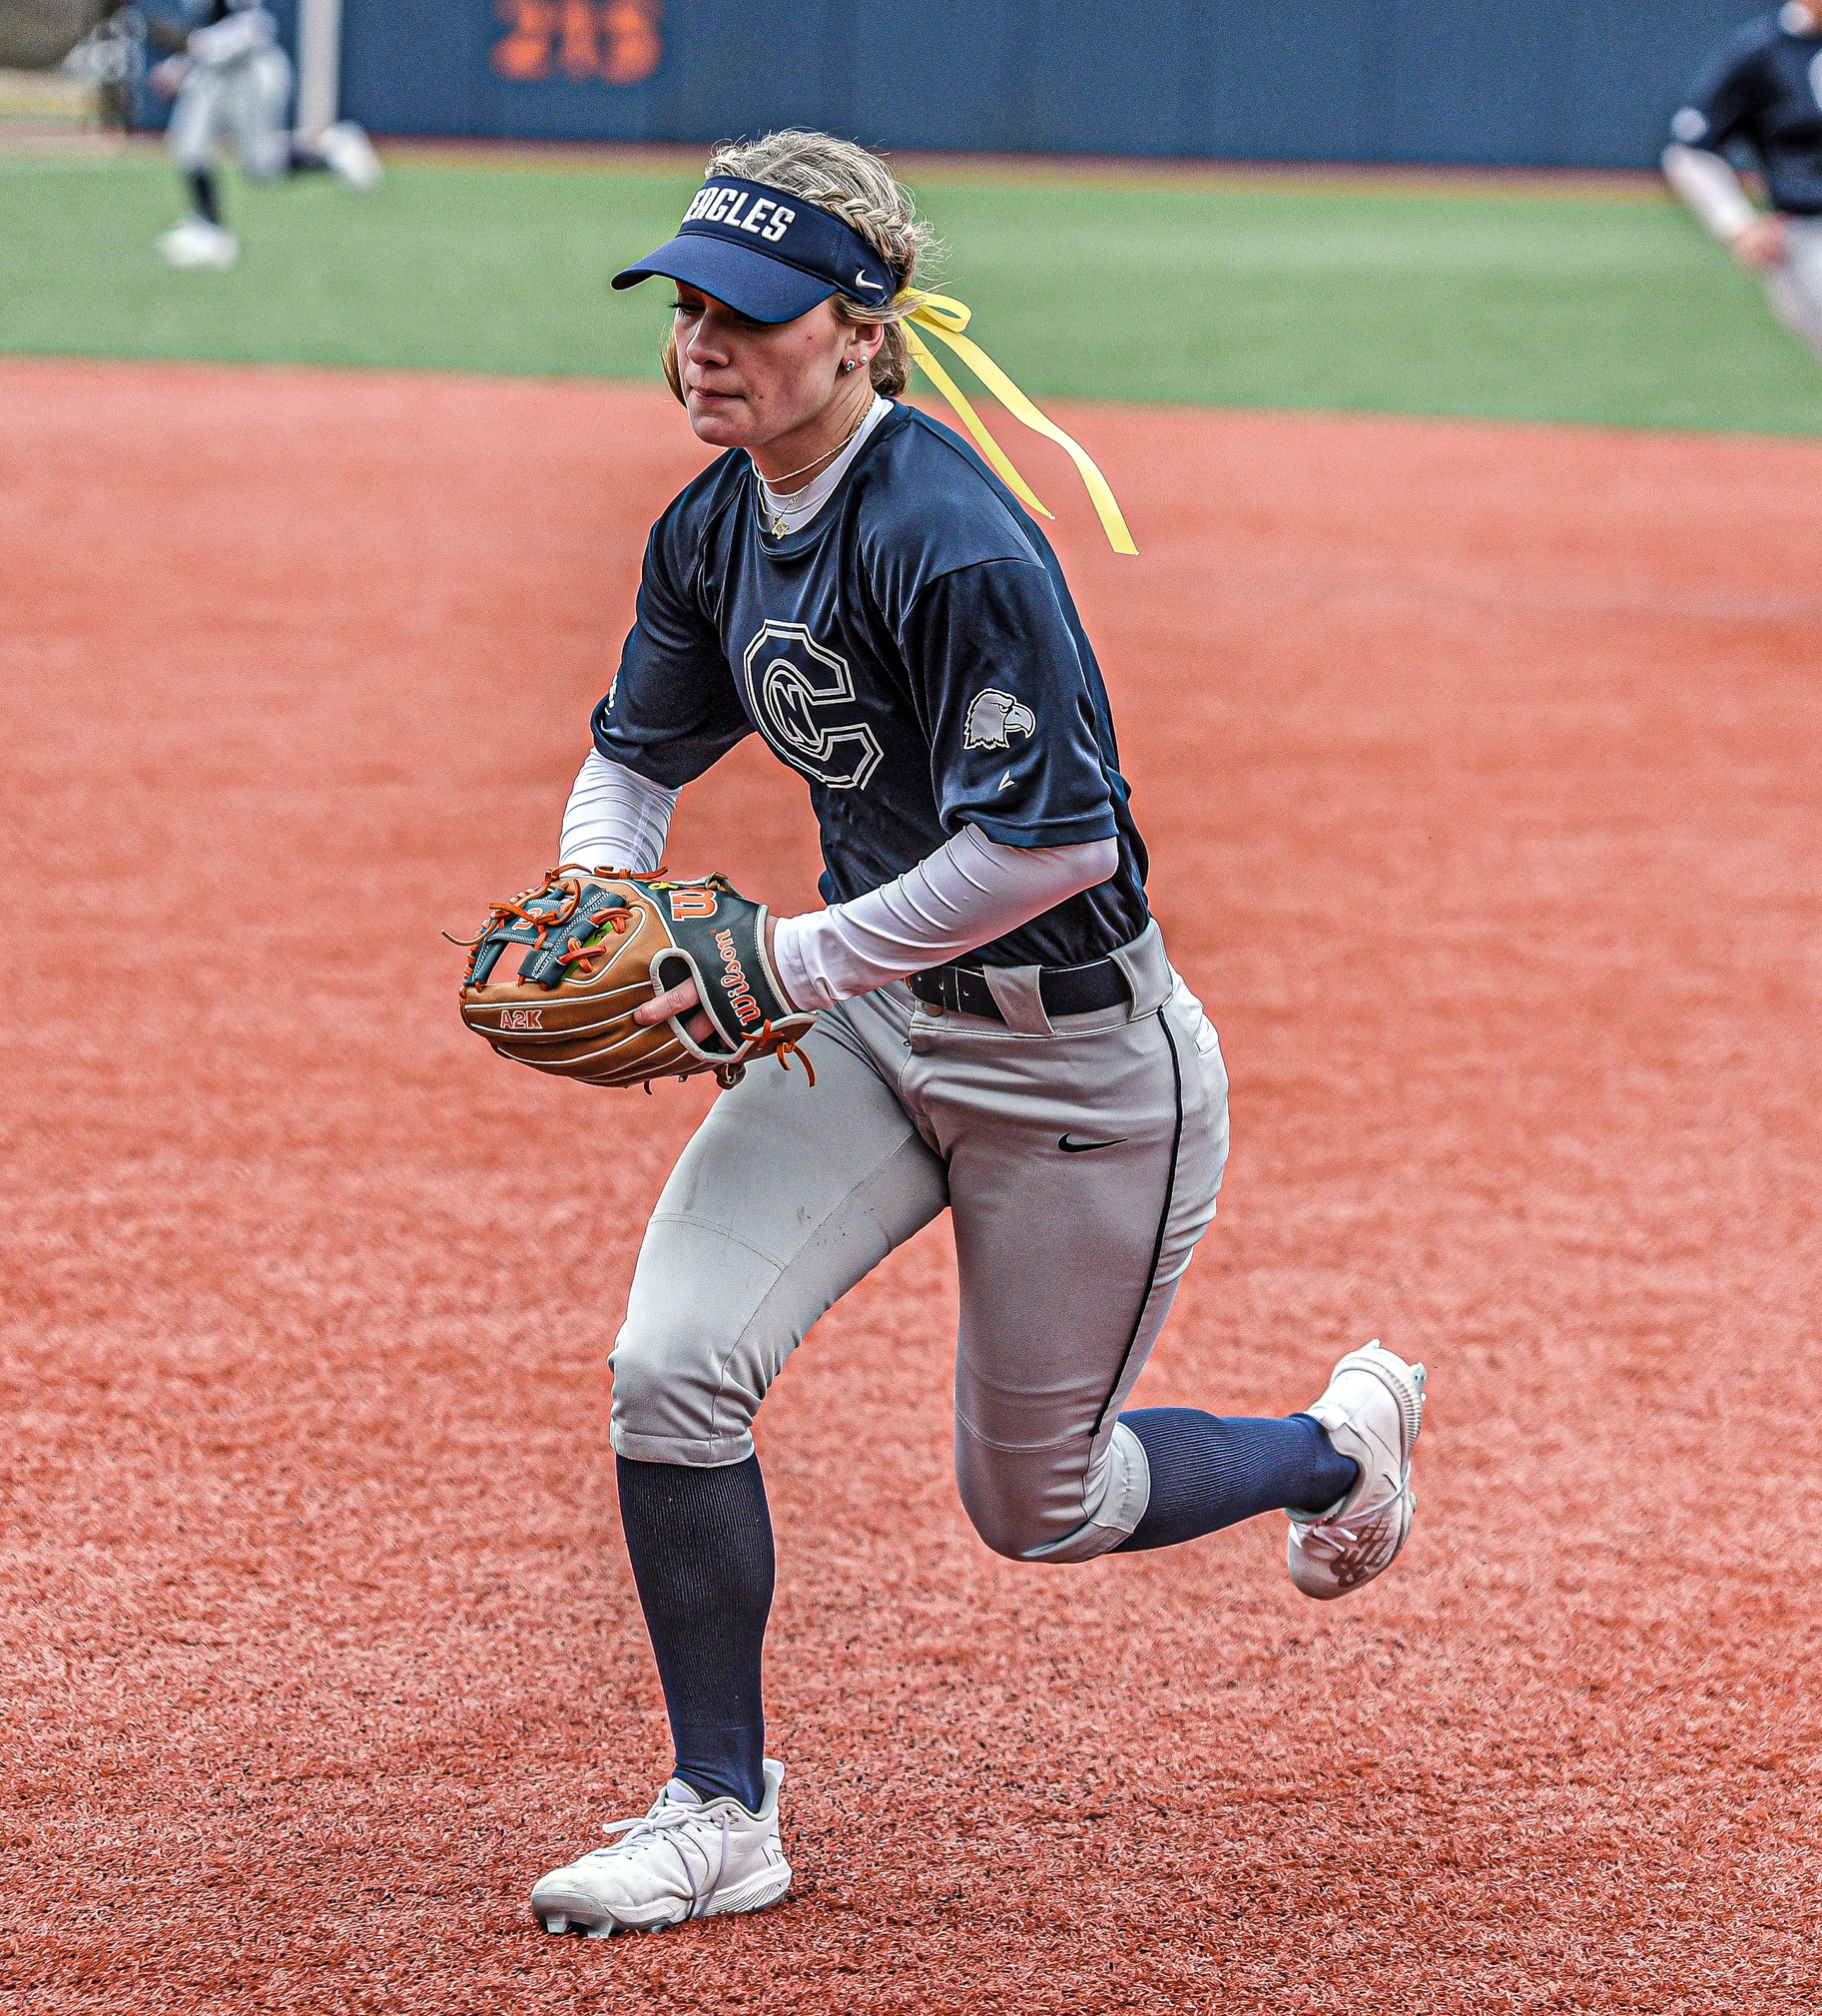 C-N closes out NFCA Leadoff Classic with 4-2 triumph over ODU